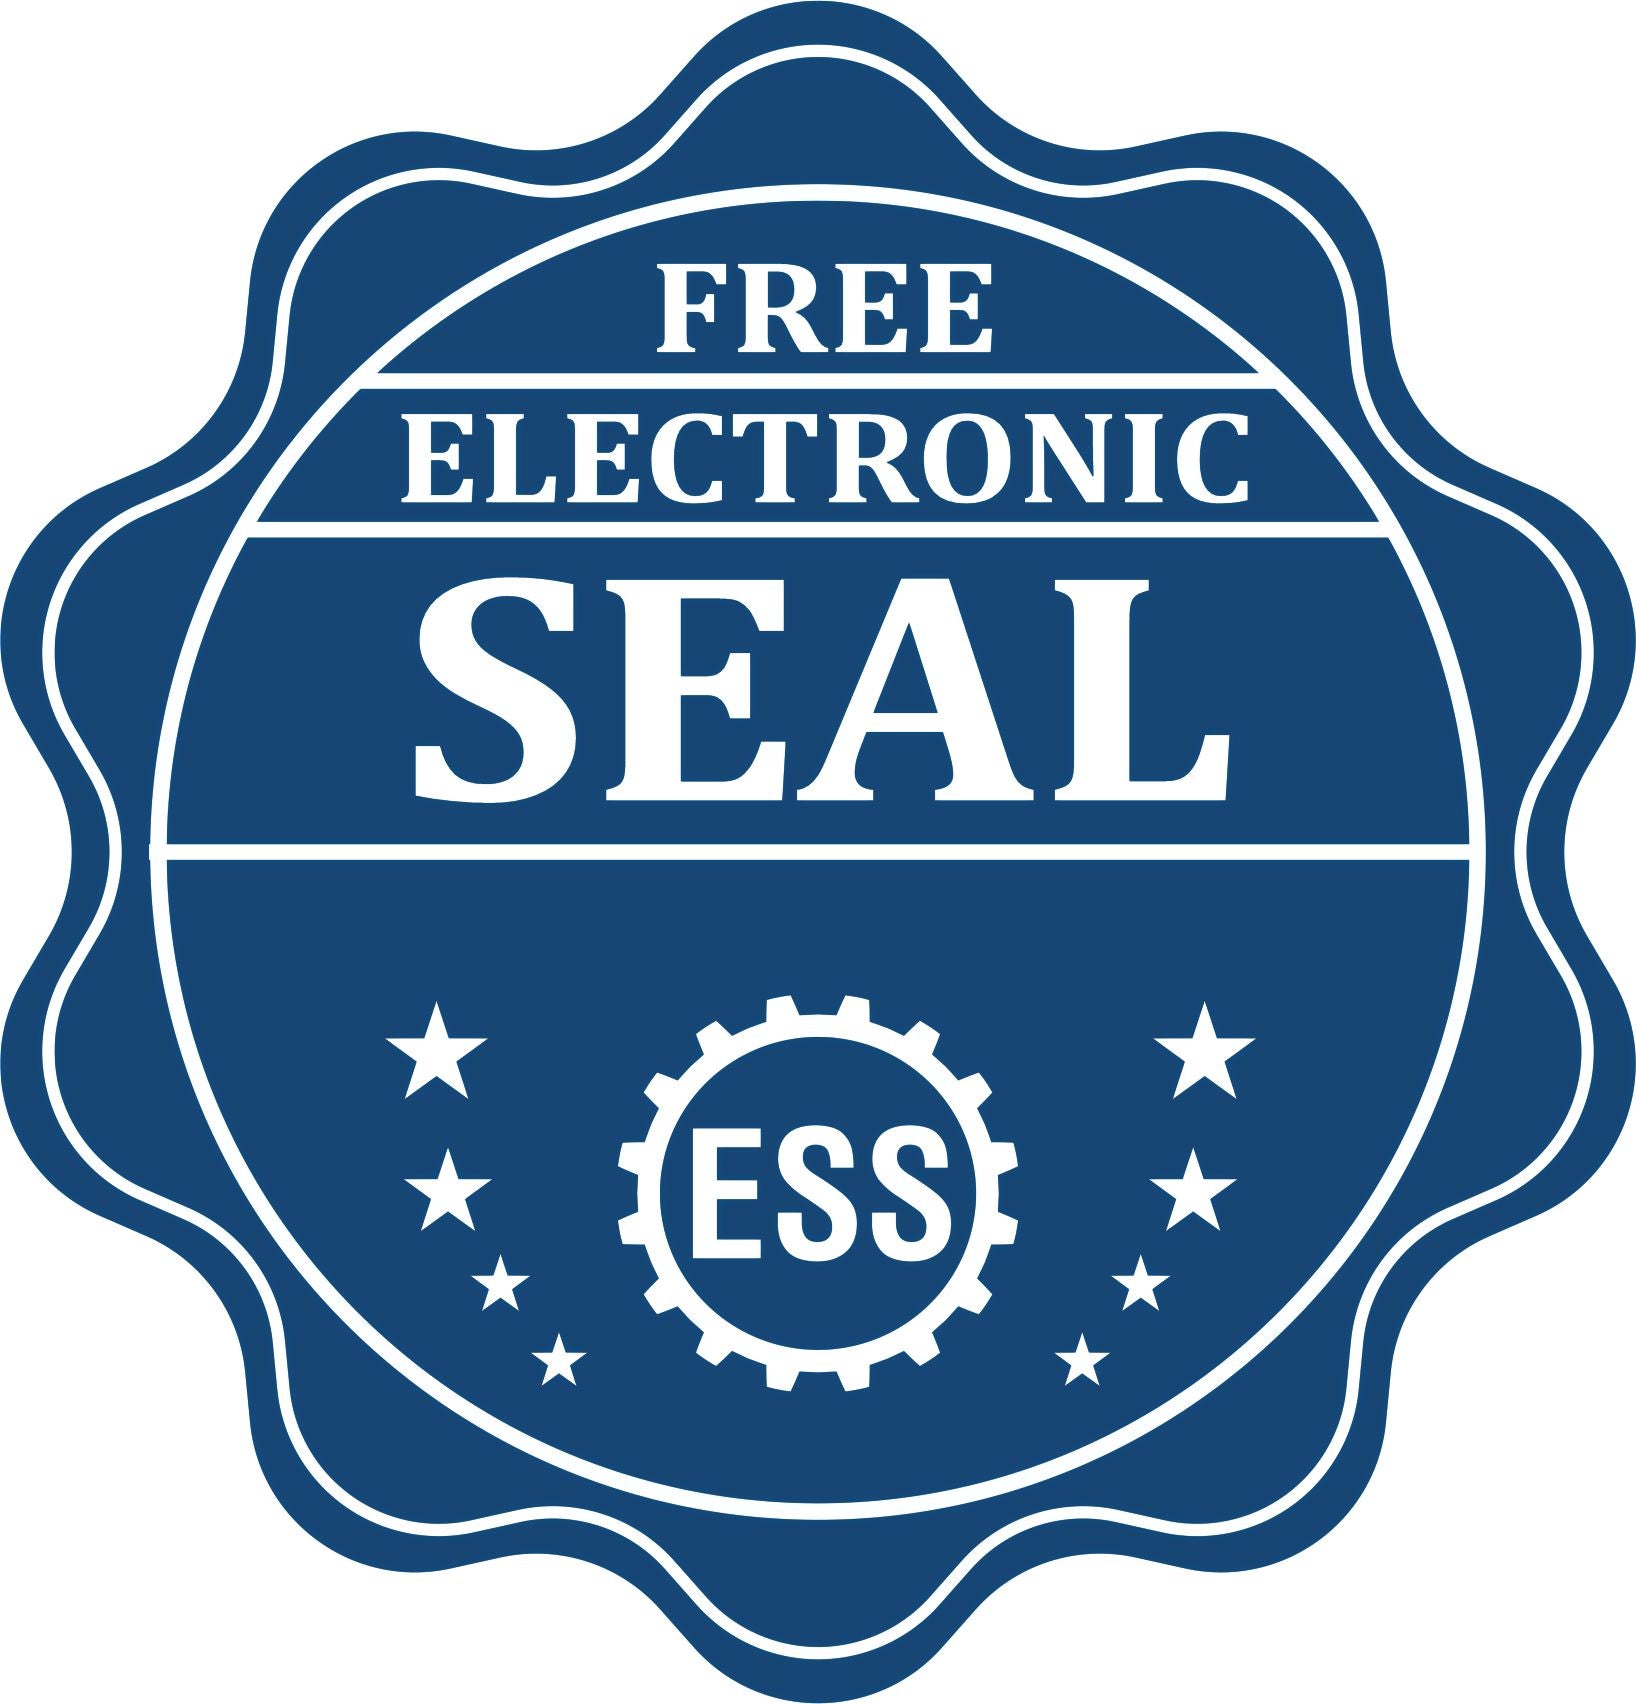 A badge showing a free electronic seal for the Handheld Florida Land Surveyor Seal with stars and the ESS gear on the emblem.